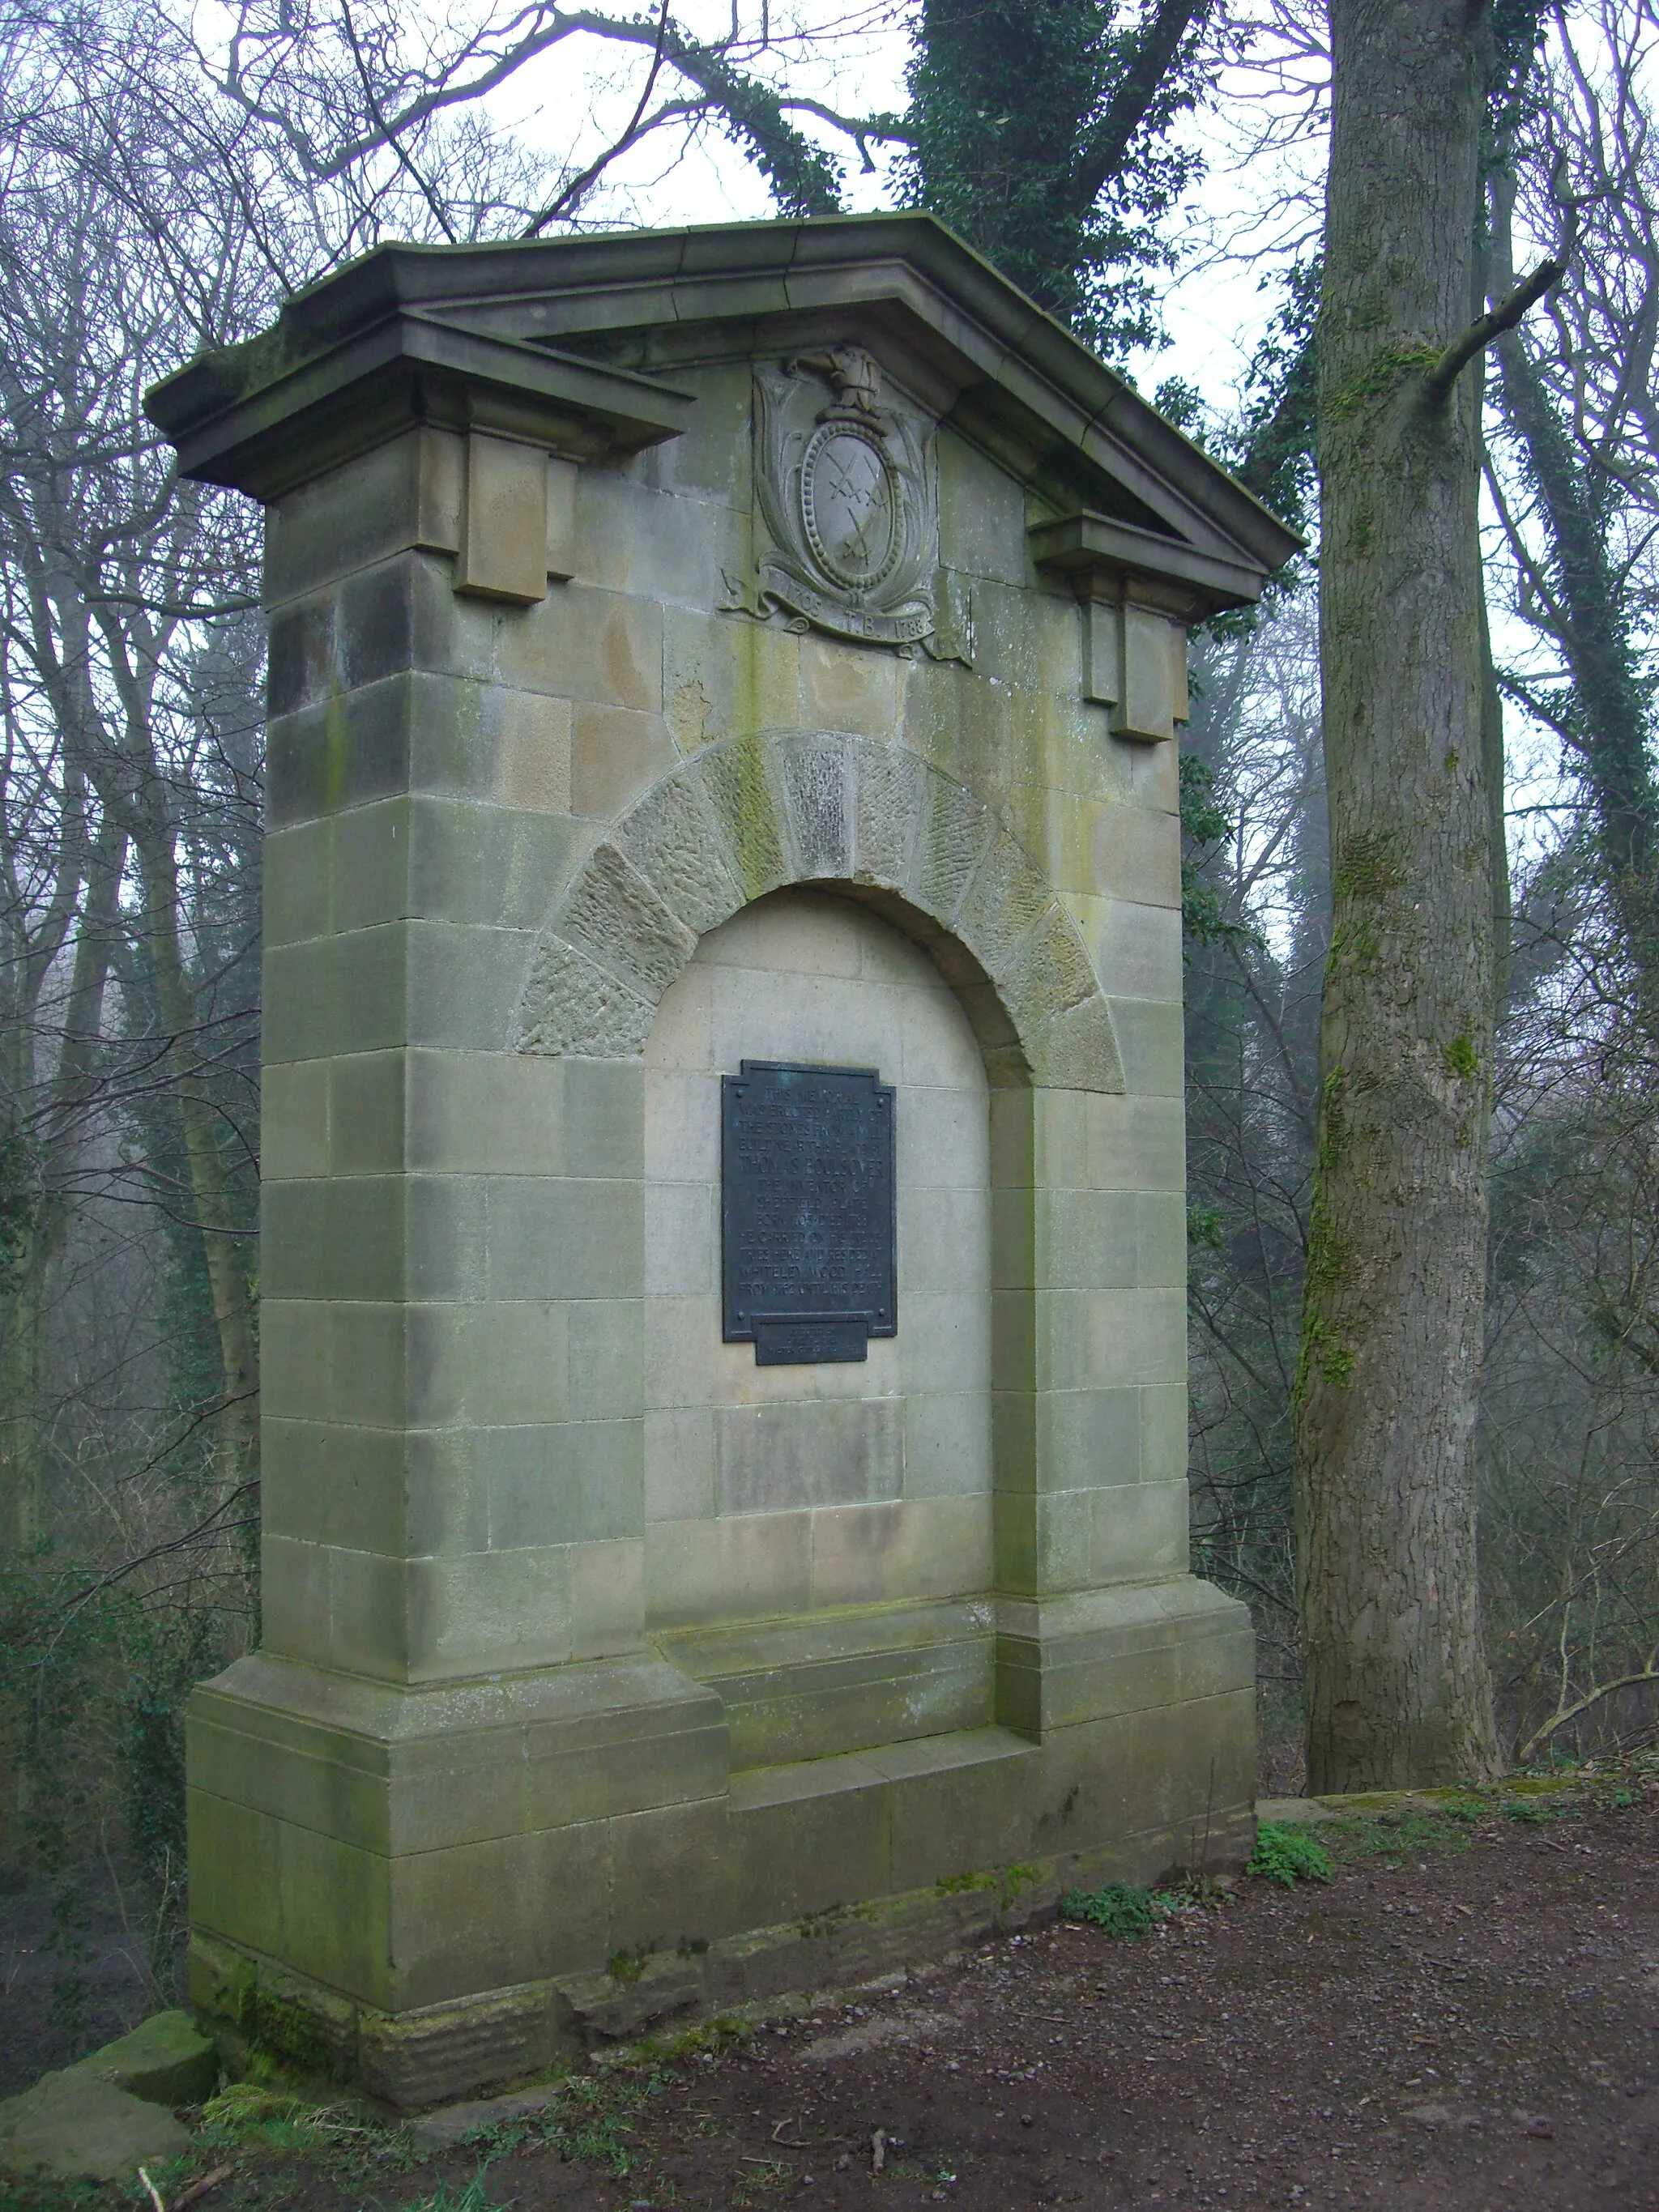 Photo showing: Thomas Boulsover Memorial at Wire Mill Dam in Sheffield, England. This Grade II Listed Building dates from 1927 when it was erected by the then Master Cutler David Flather with stones from a nearby mill.